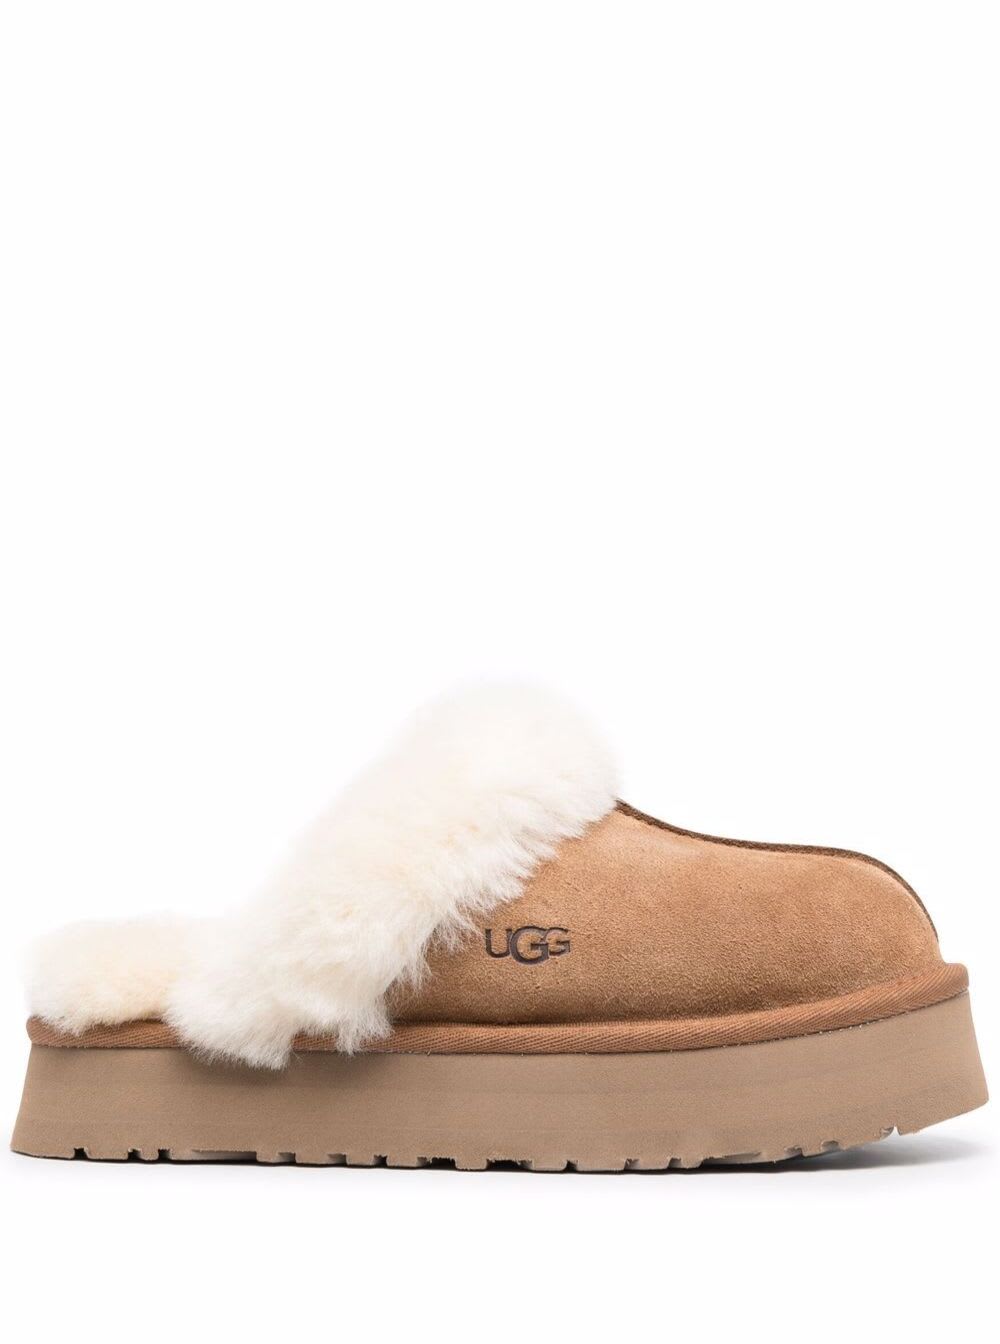 UGG Disquette Suede Leather Mules